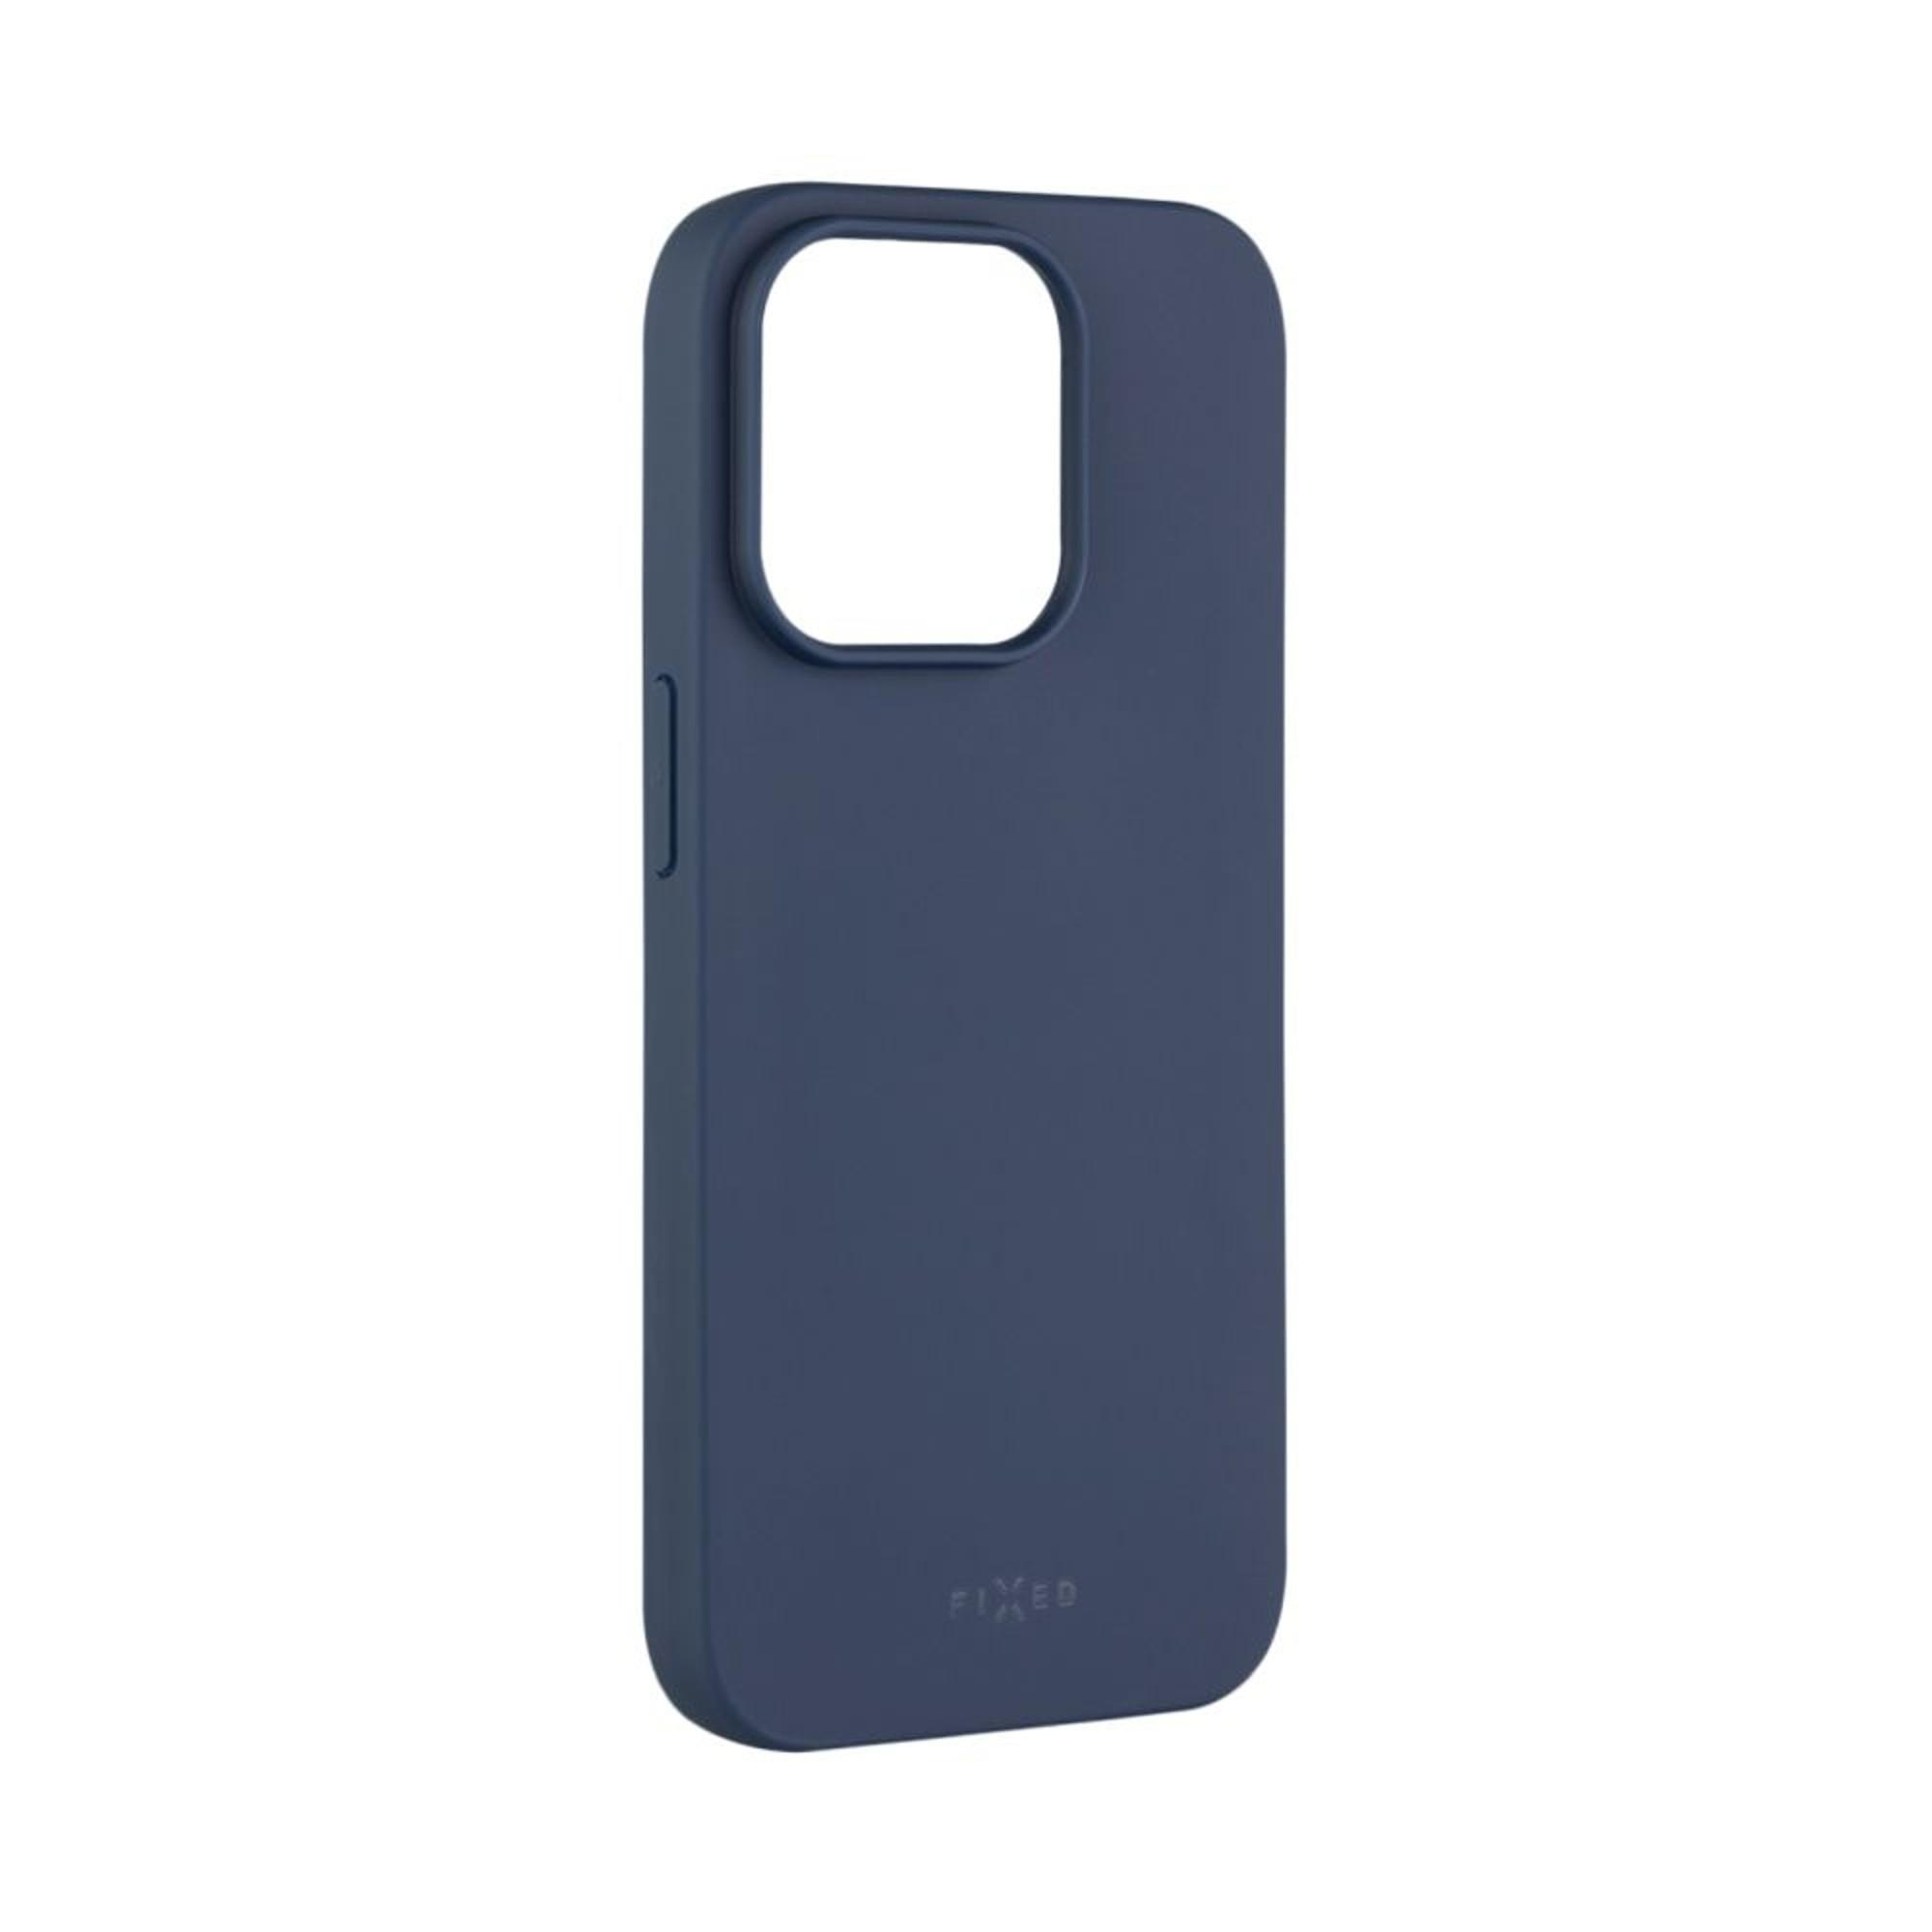 FIXED 14 Blau iPhone Backcover, Apple, FIXST-930-BL, Pro,